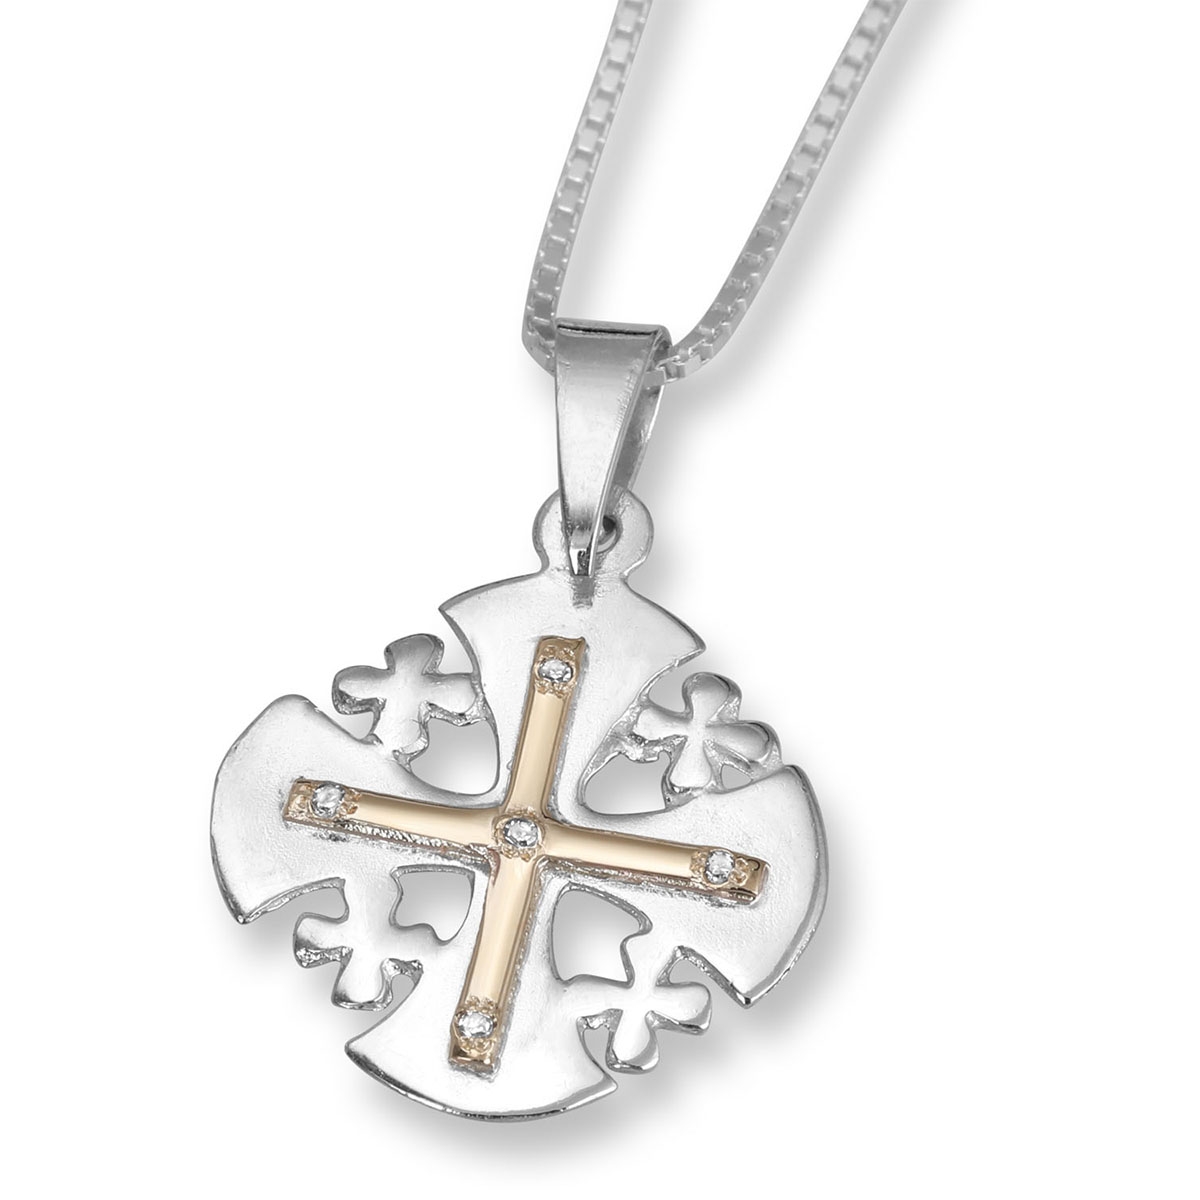 Sterling Silver and 9K Gold Rounded Jerusalem Cross Pendant with Diamonds - 1